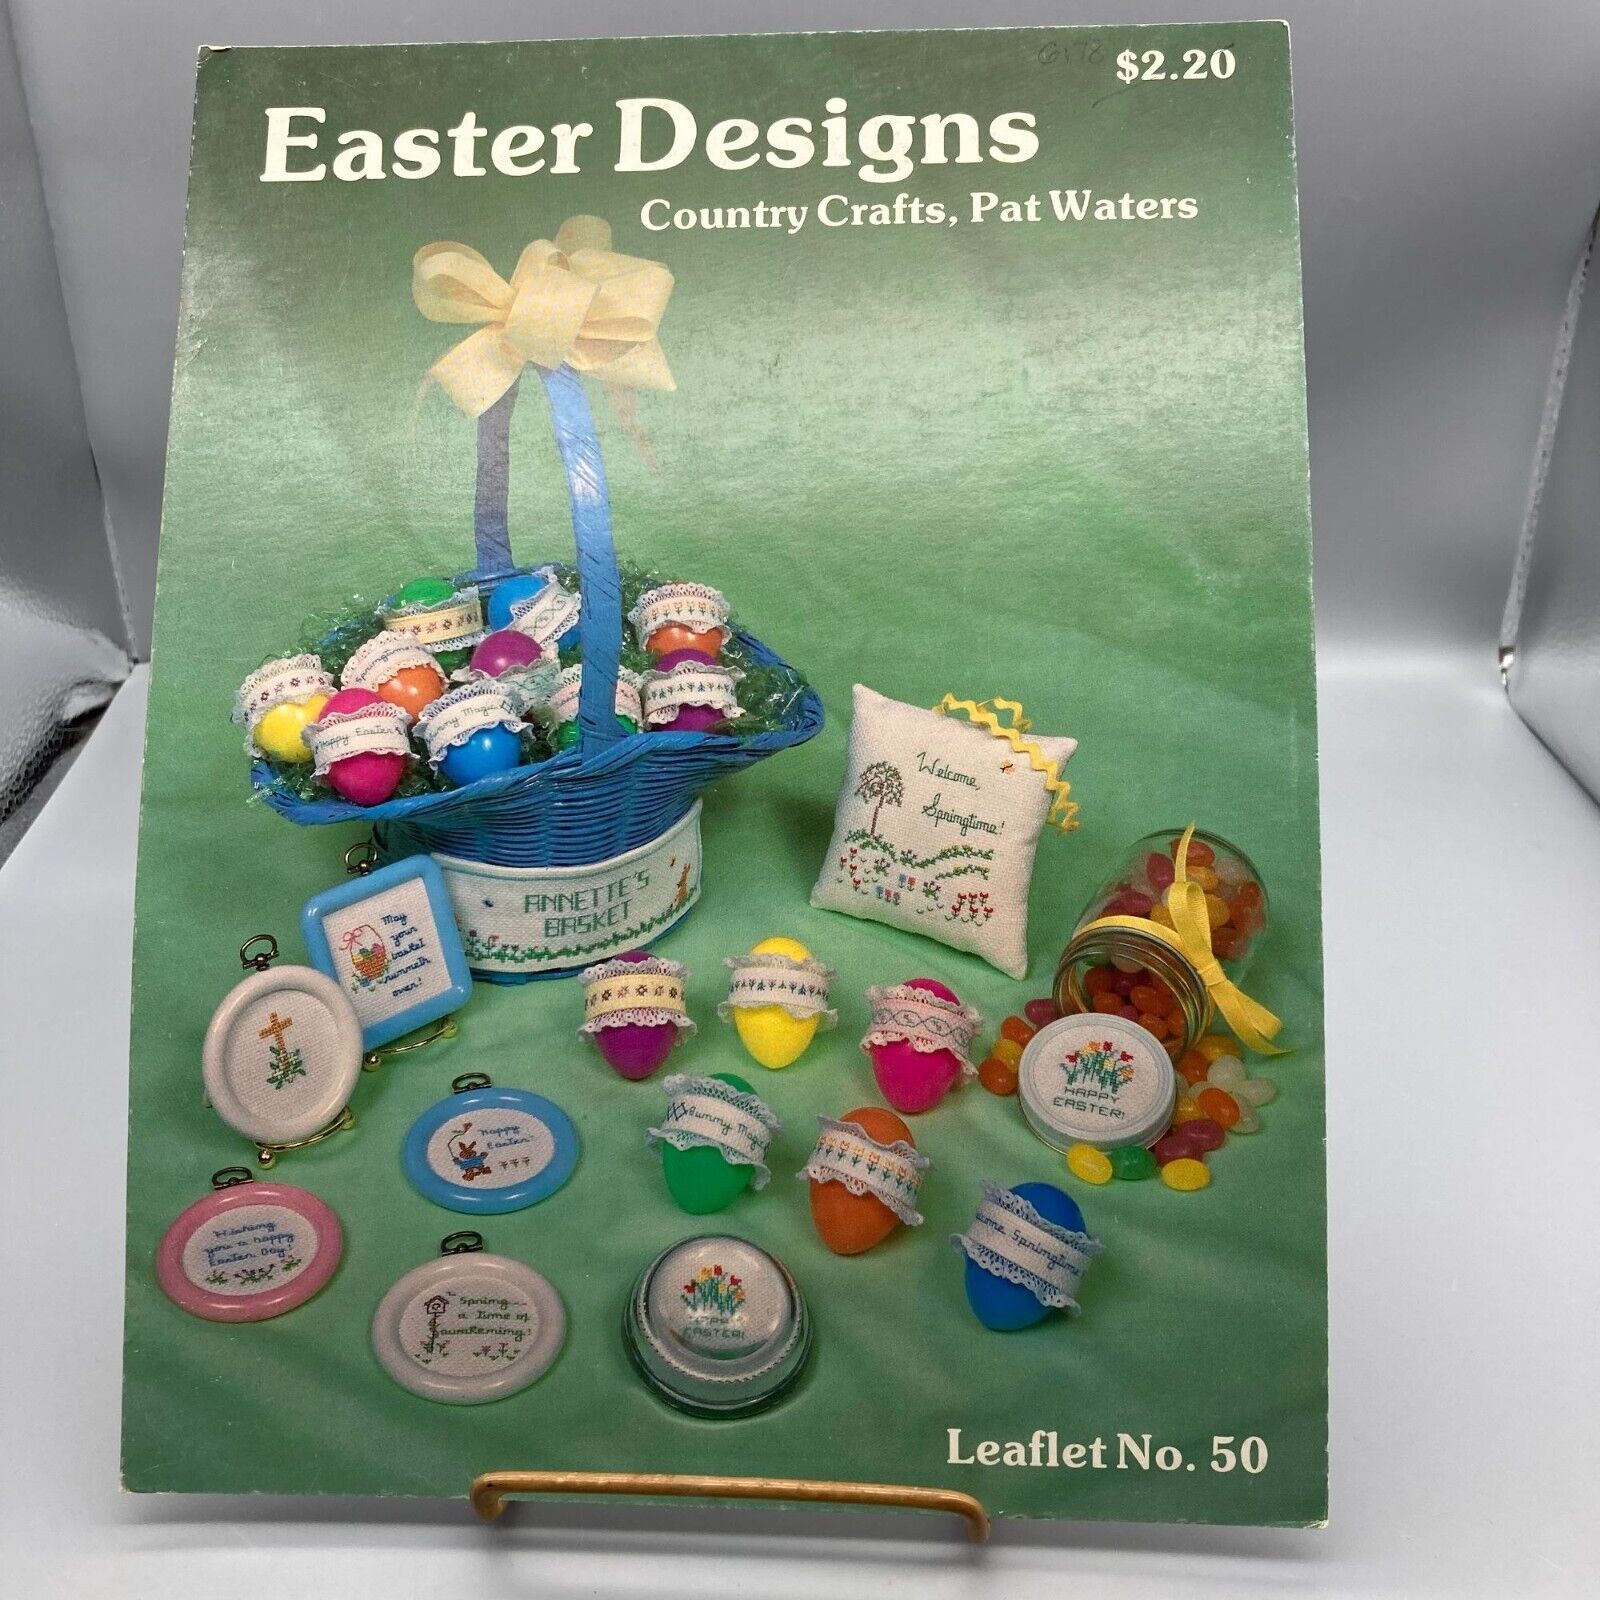 Vintage Cross Stitch Patterns, Easter Designs by Pat Waters, Country Crafts Leaf - $7.85